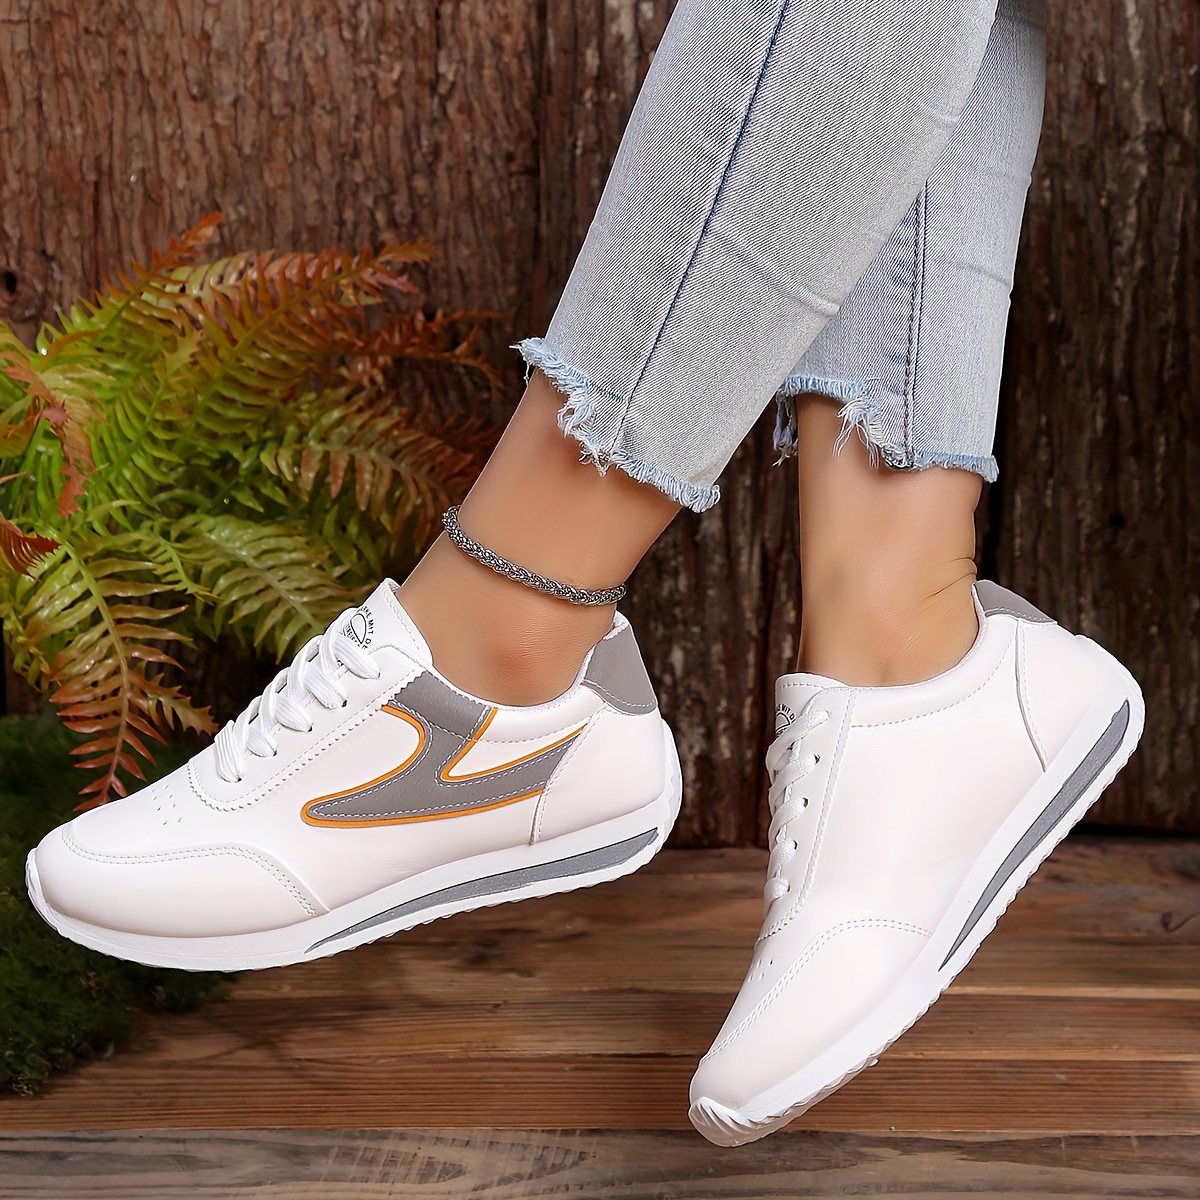 simple flat sneakers women s casual lace outdoor shoes details 1